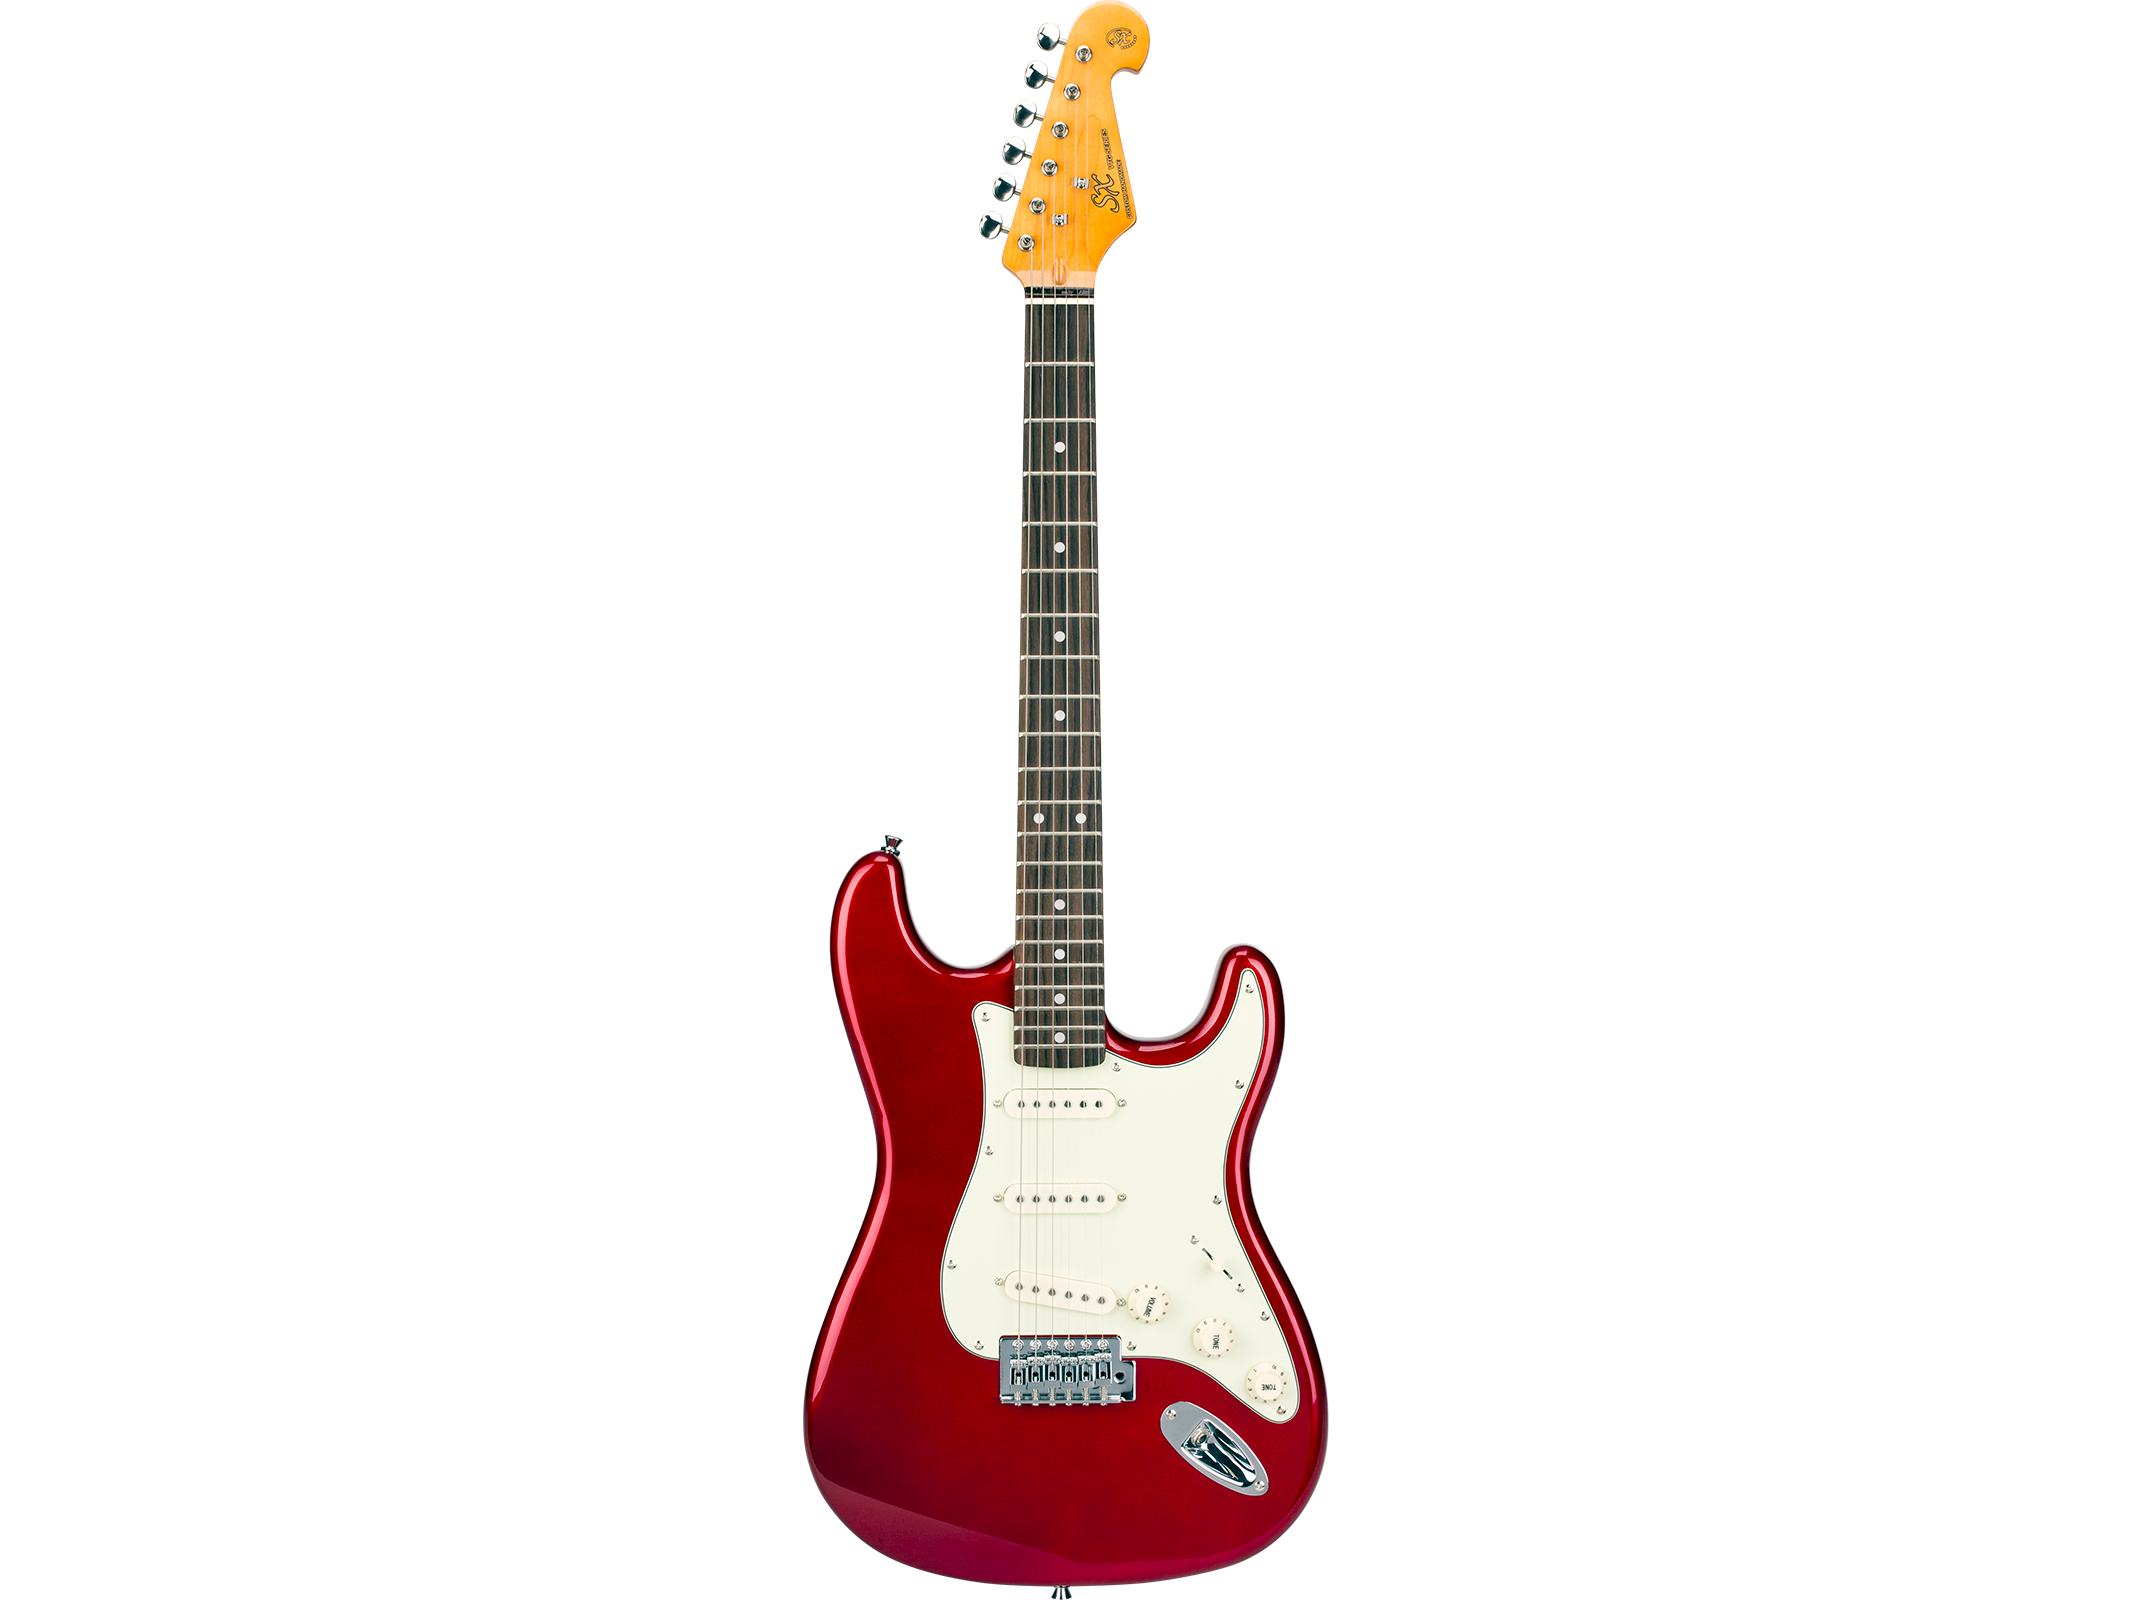 SX Electric Guitar SC Style in Red